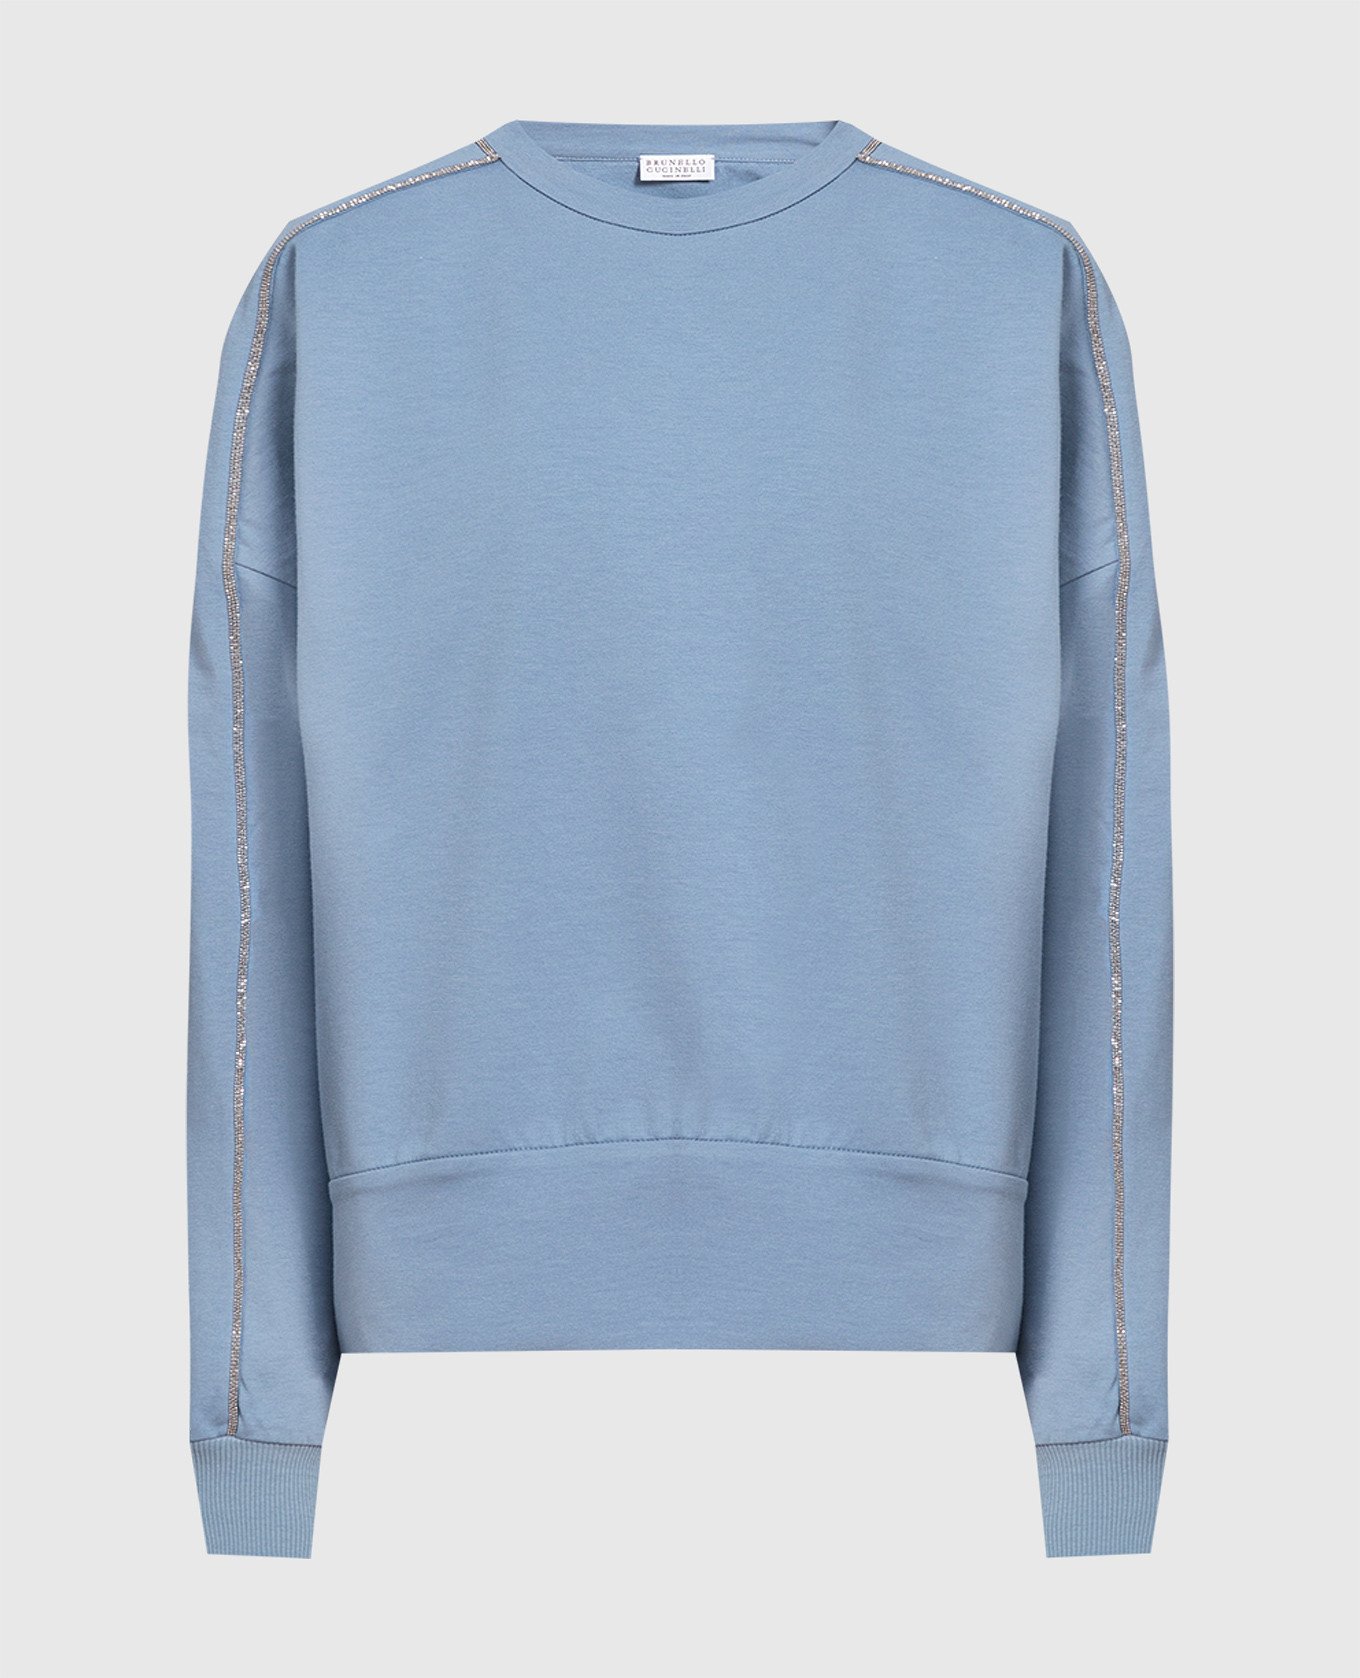 Blue jumper with eco-brass